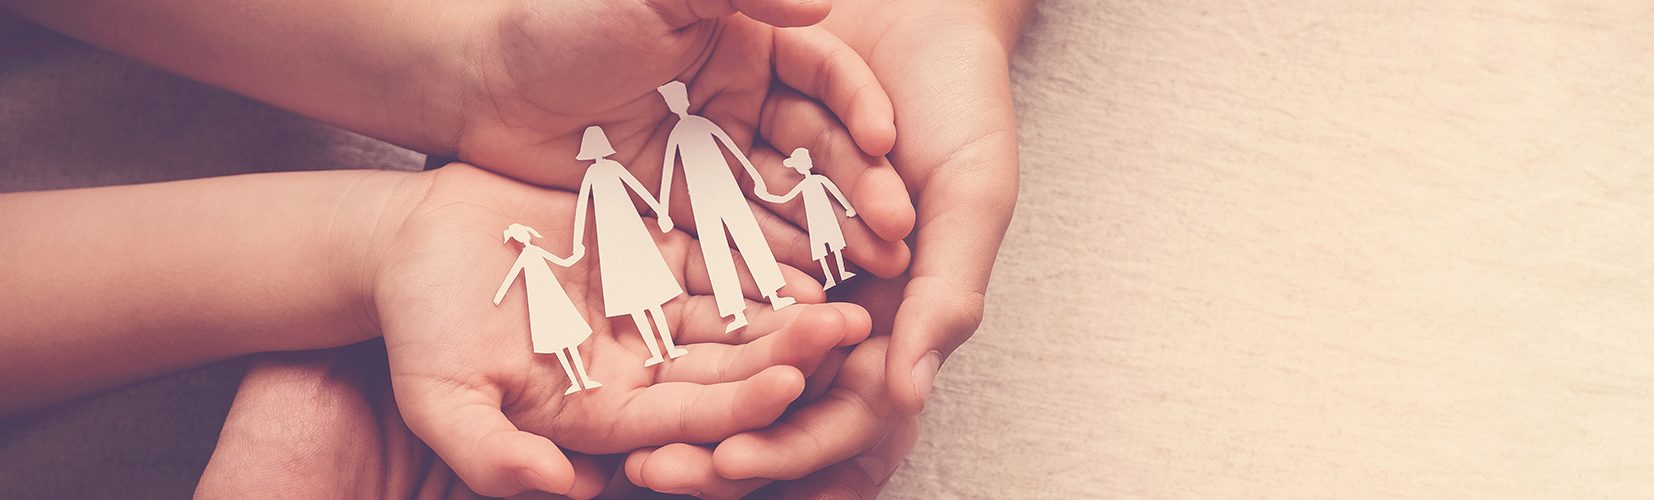 Bild Quelle: AdobeStock_282163930_©sewcream _hands holding paper family cutout, family home,life insurance, adoption foster care